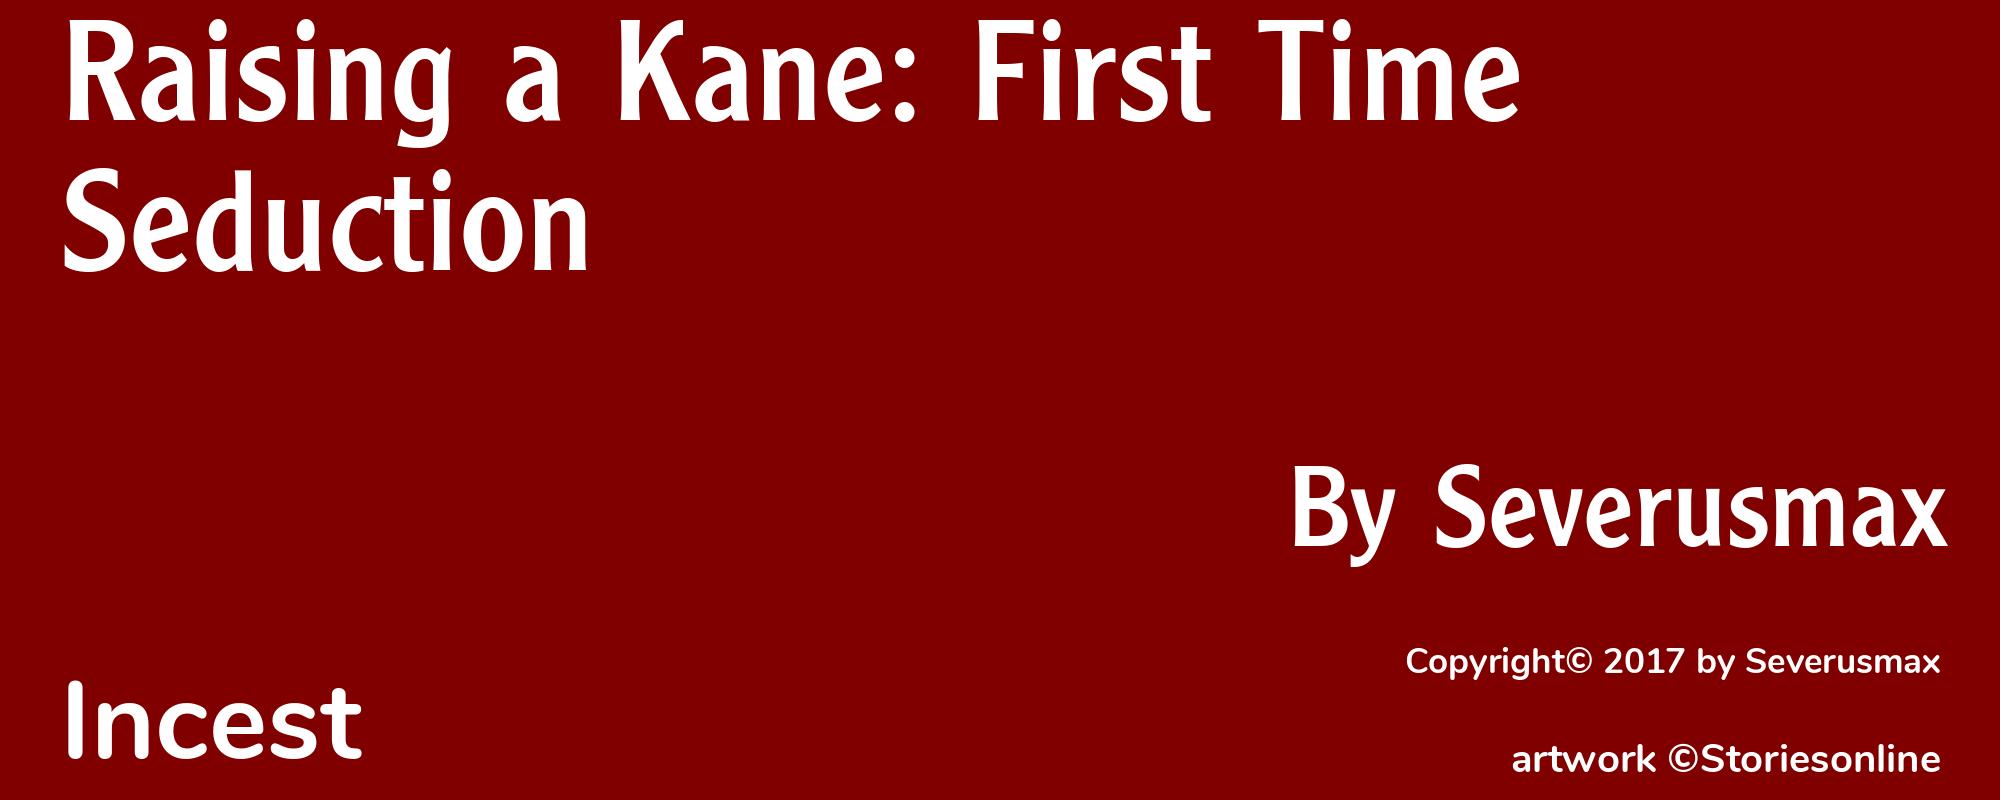 Raising a Kane: First Time Seduction - Cover